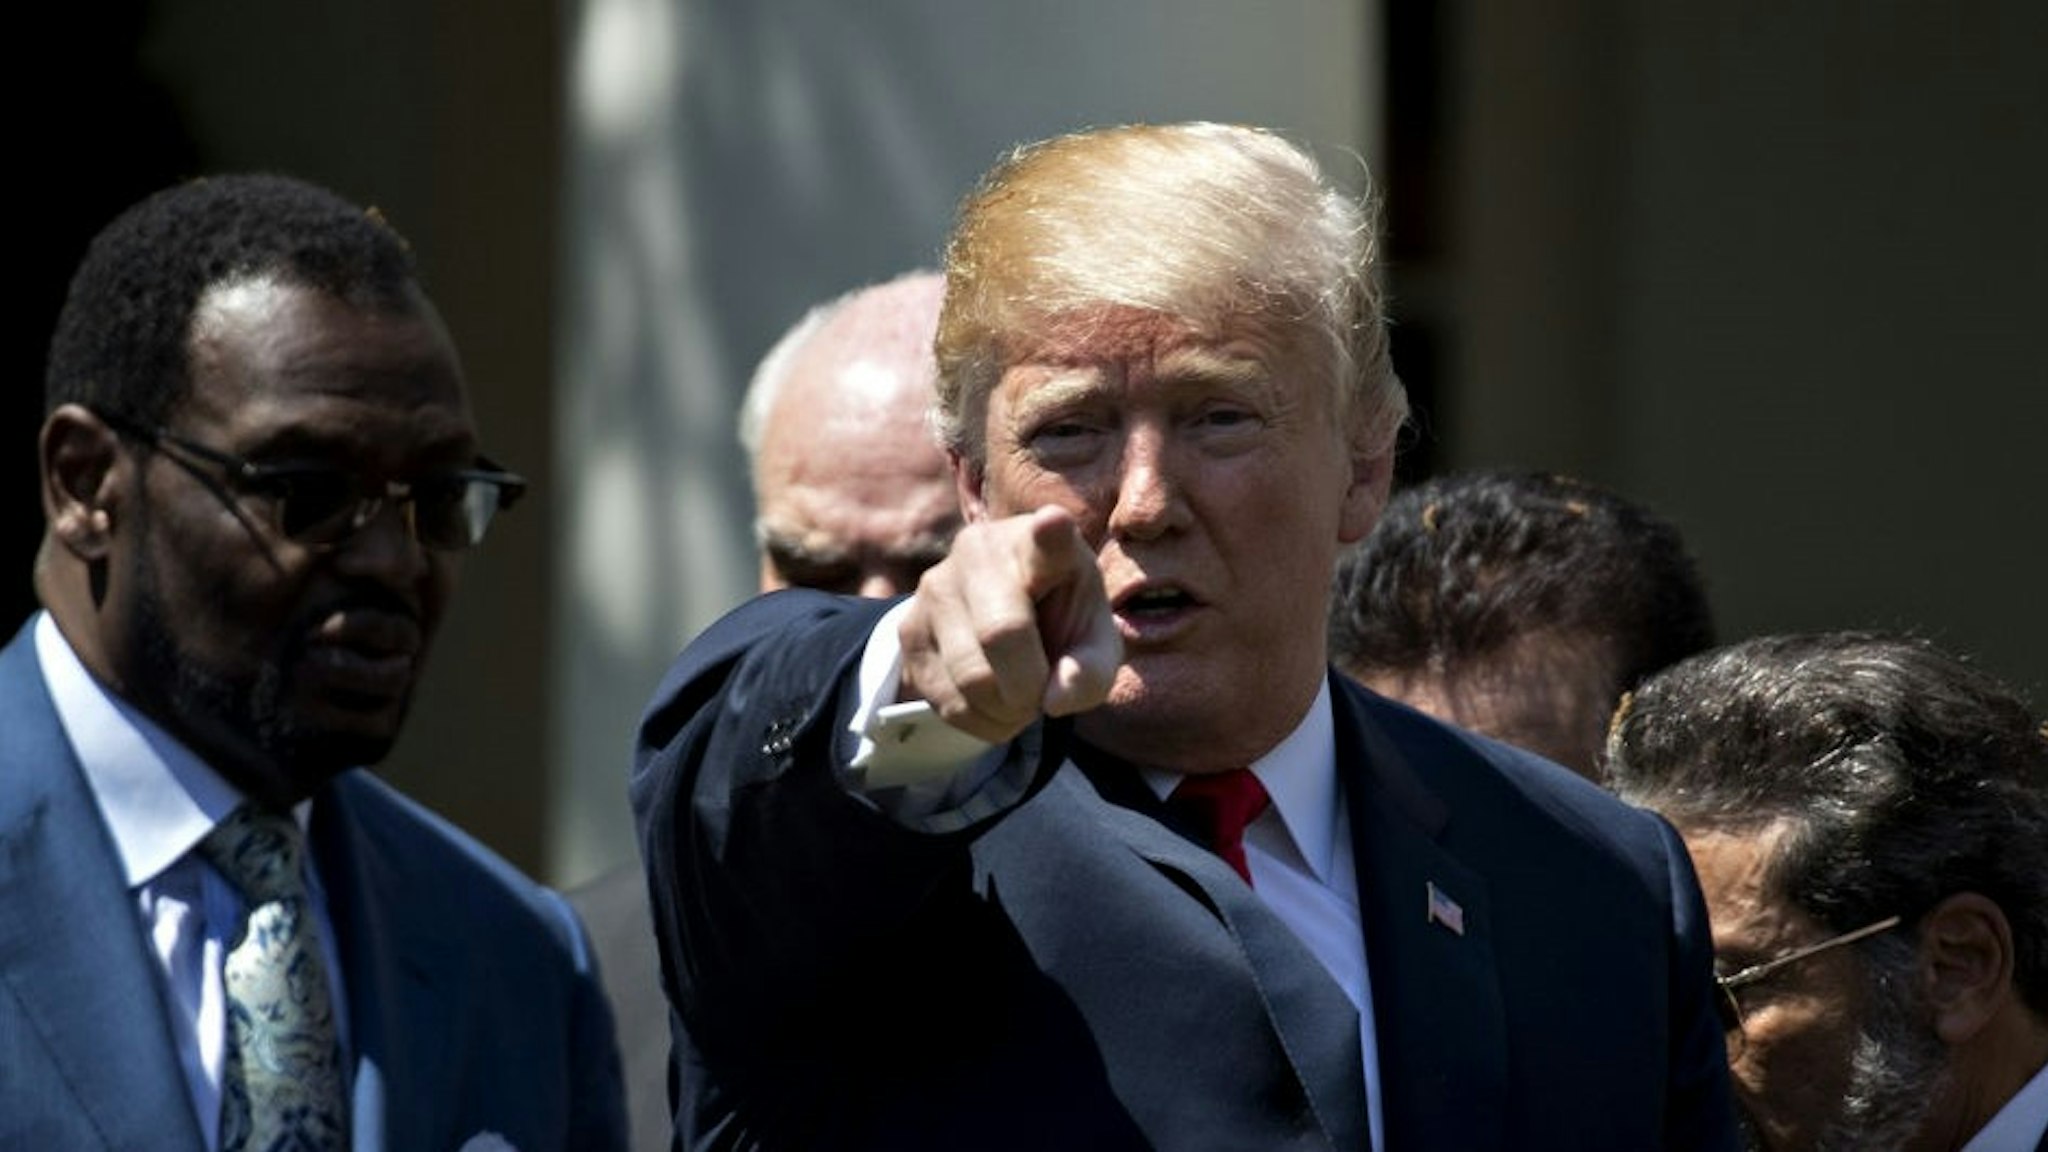 U.S. President Donald Trump points to the audience after signing an executive order entitled Establishment of a White House Faith and Opportunity Initiative during a National Day of Prayer ceremony in the Rose Garden of the White House in Washington, D.C., U.S. on Thursday, May 3, 2018. Congress in 1988 called on the president to issue each year a proclamation designating the first Thursday in May as a National Day of Prayer.